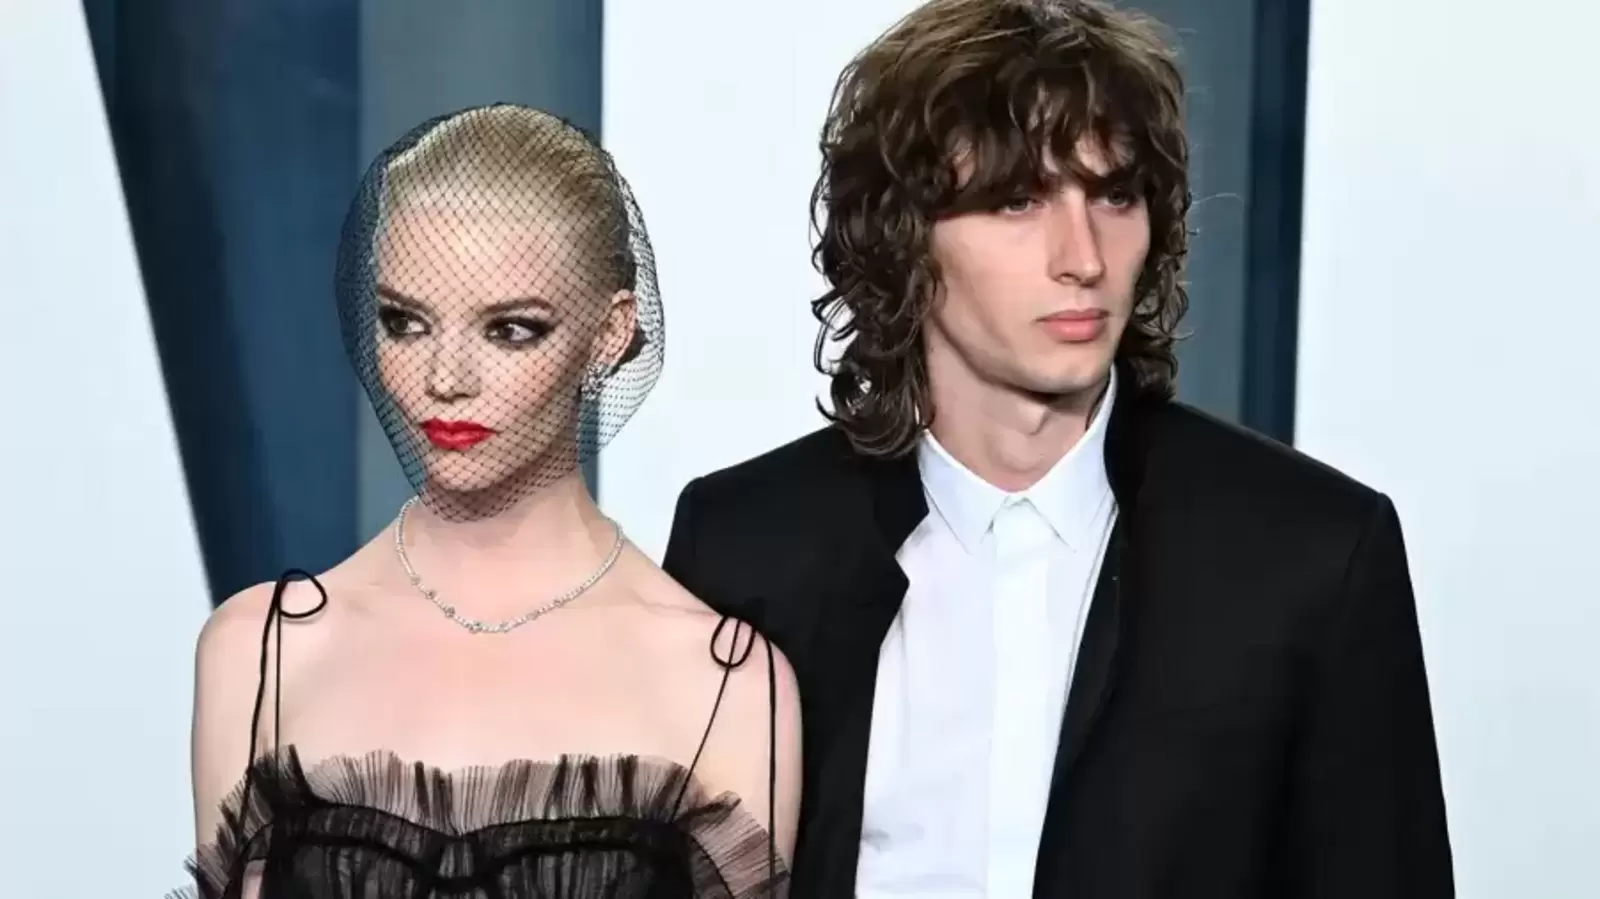 Queen’s Gambit star Anya Taylor-Joy marries in ‘intimate courthouse wedding’, claim reports